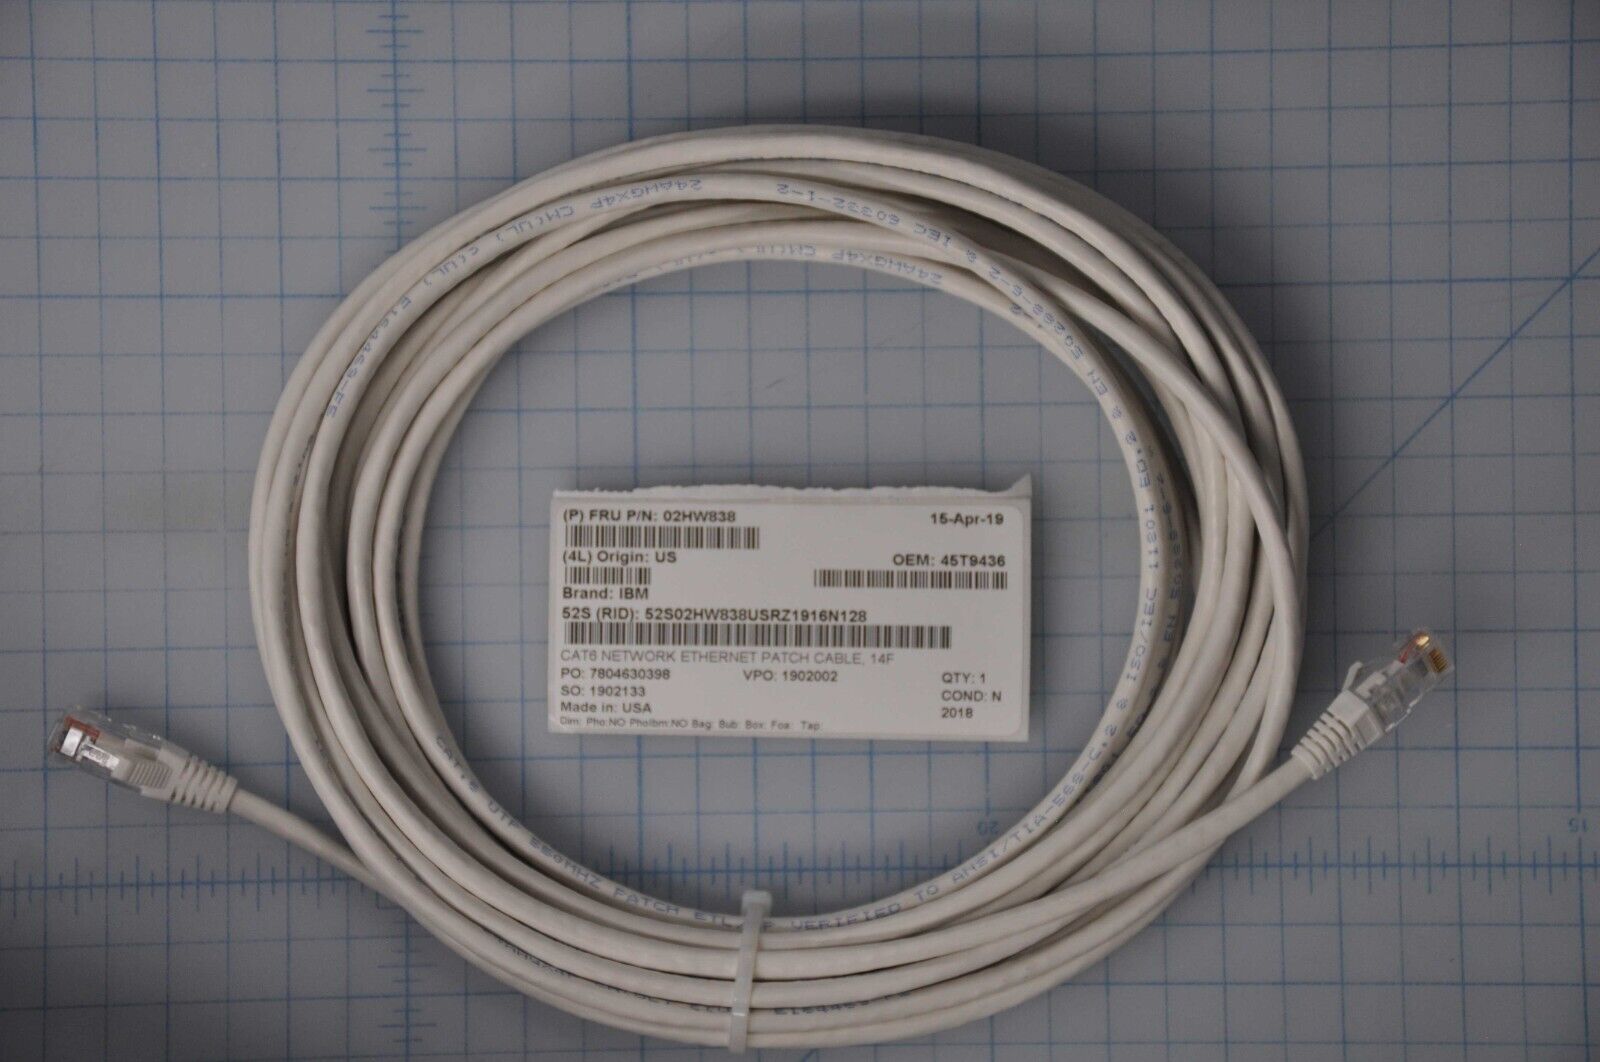 New IBM CAT6 14FT Network Ethernet Patch Cable 45T9436